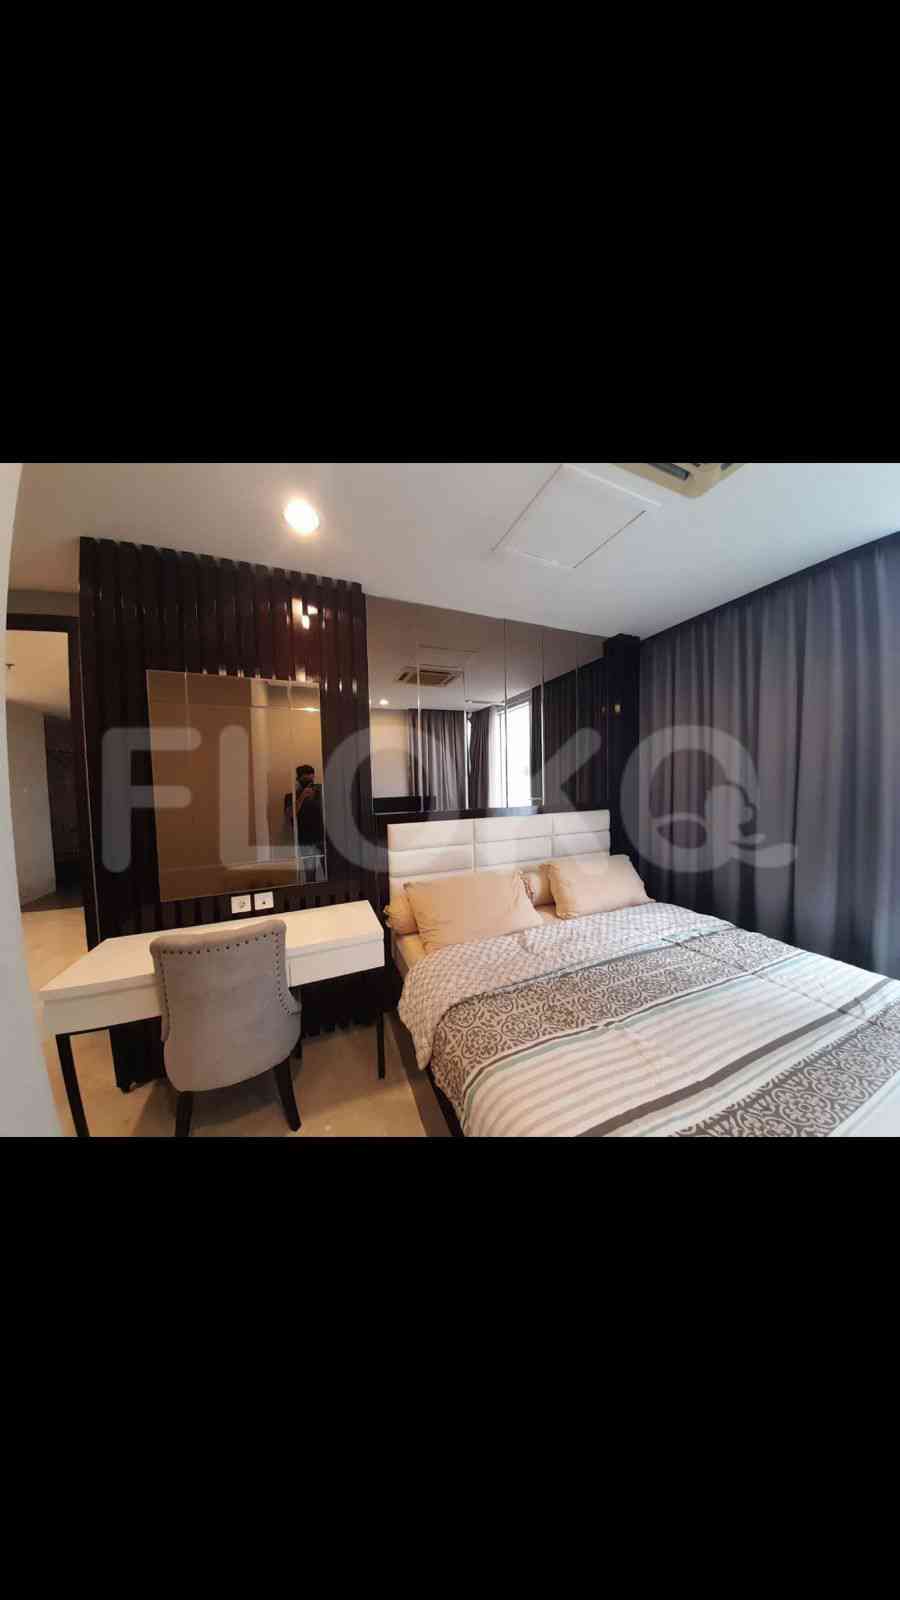 2 Bedroom on 18th Floor for Rent in The Grove Apartment - fku78d 1